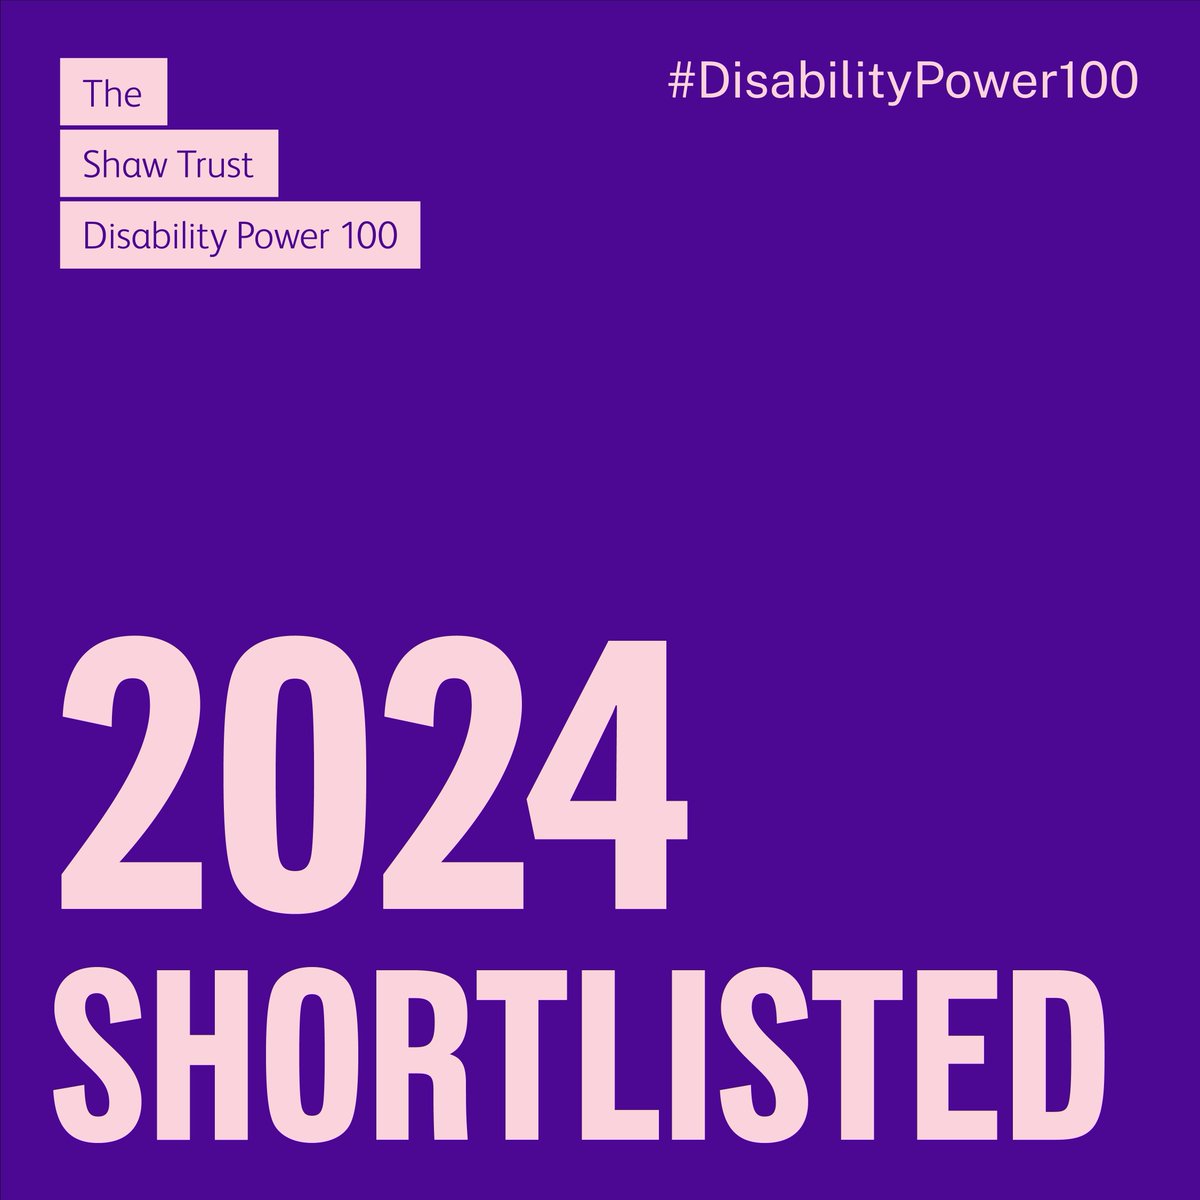 We're thrilled to learn this morning that Euan's Guide and Euan have been shortlisted for The Shaw Trust's Disability Power 100. 😃 #DisabilityPower100